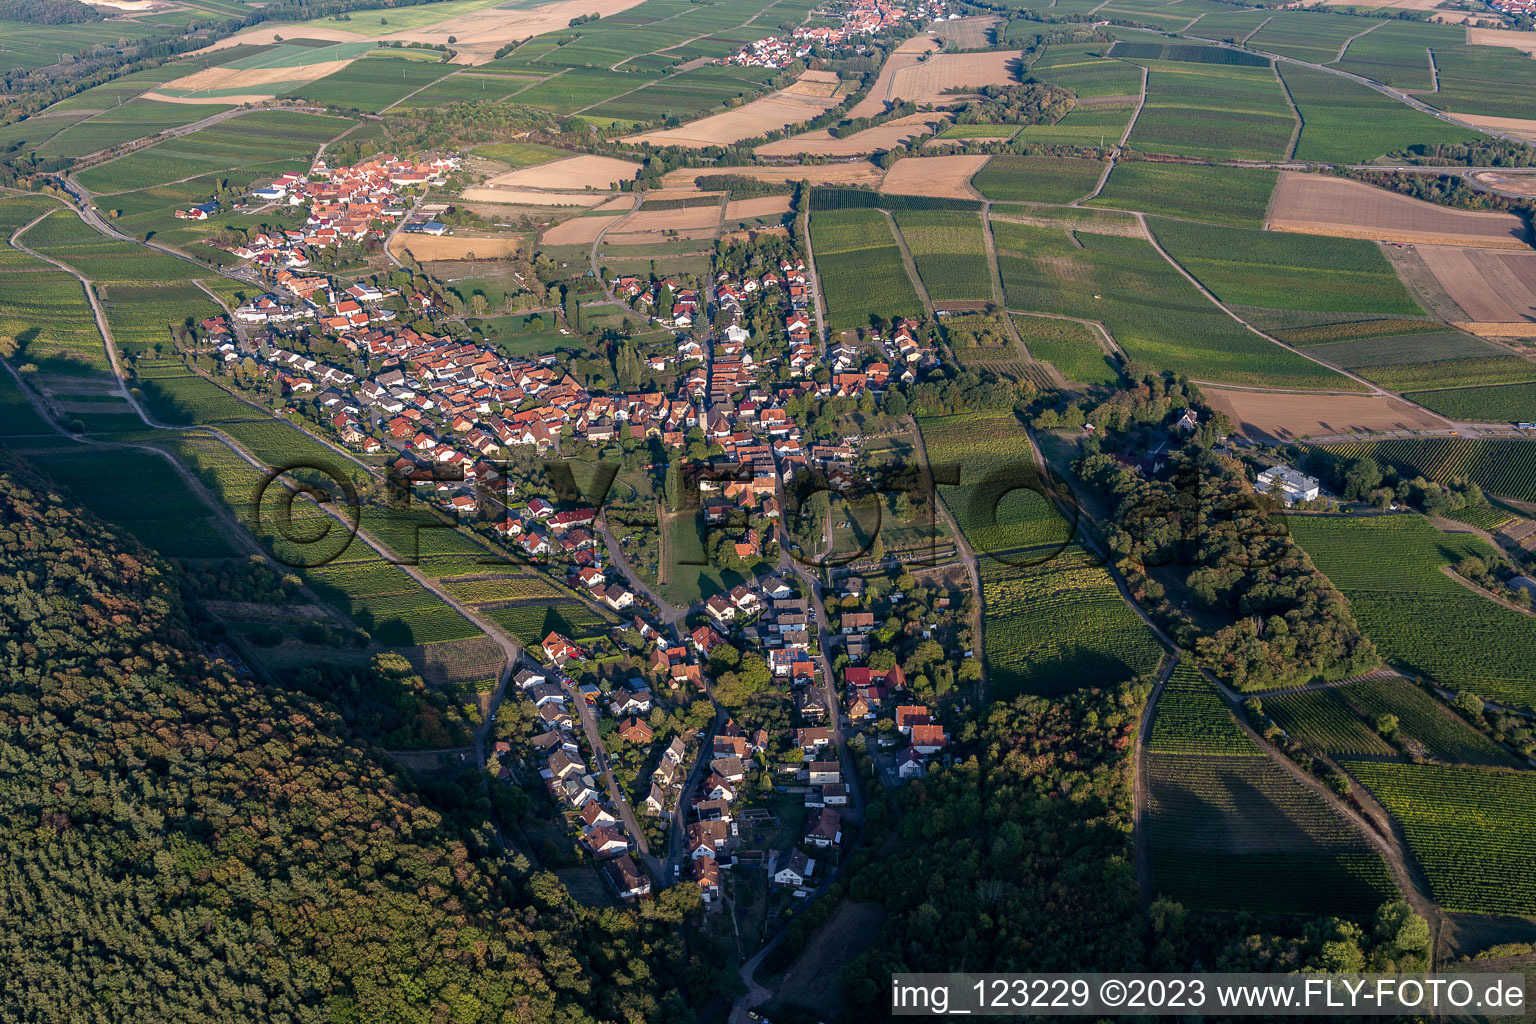 District Pleisweiler in Pleisweiler-Oberhofen in the state Rhineland-Palatinate, Germany seen from above